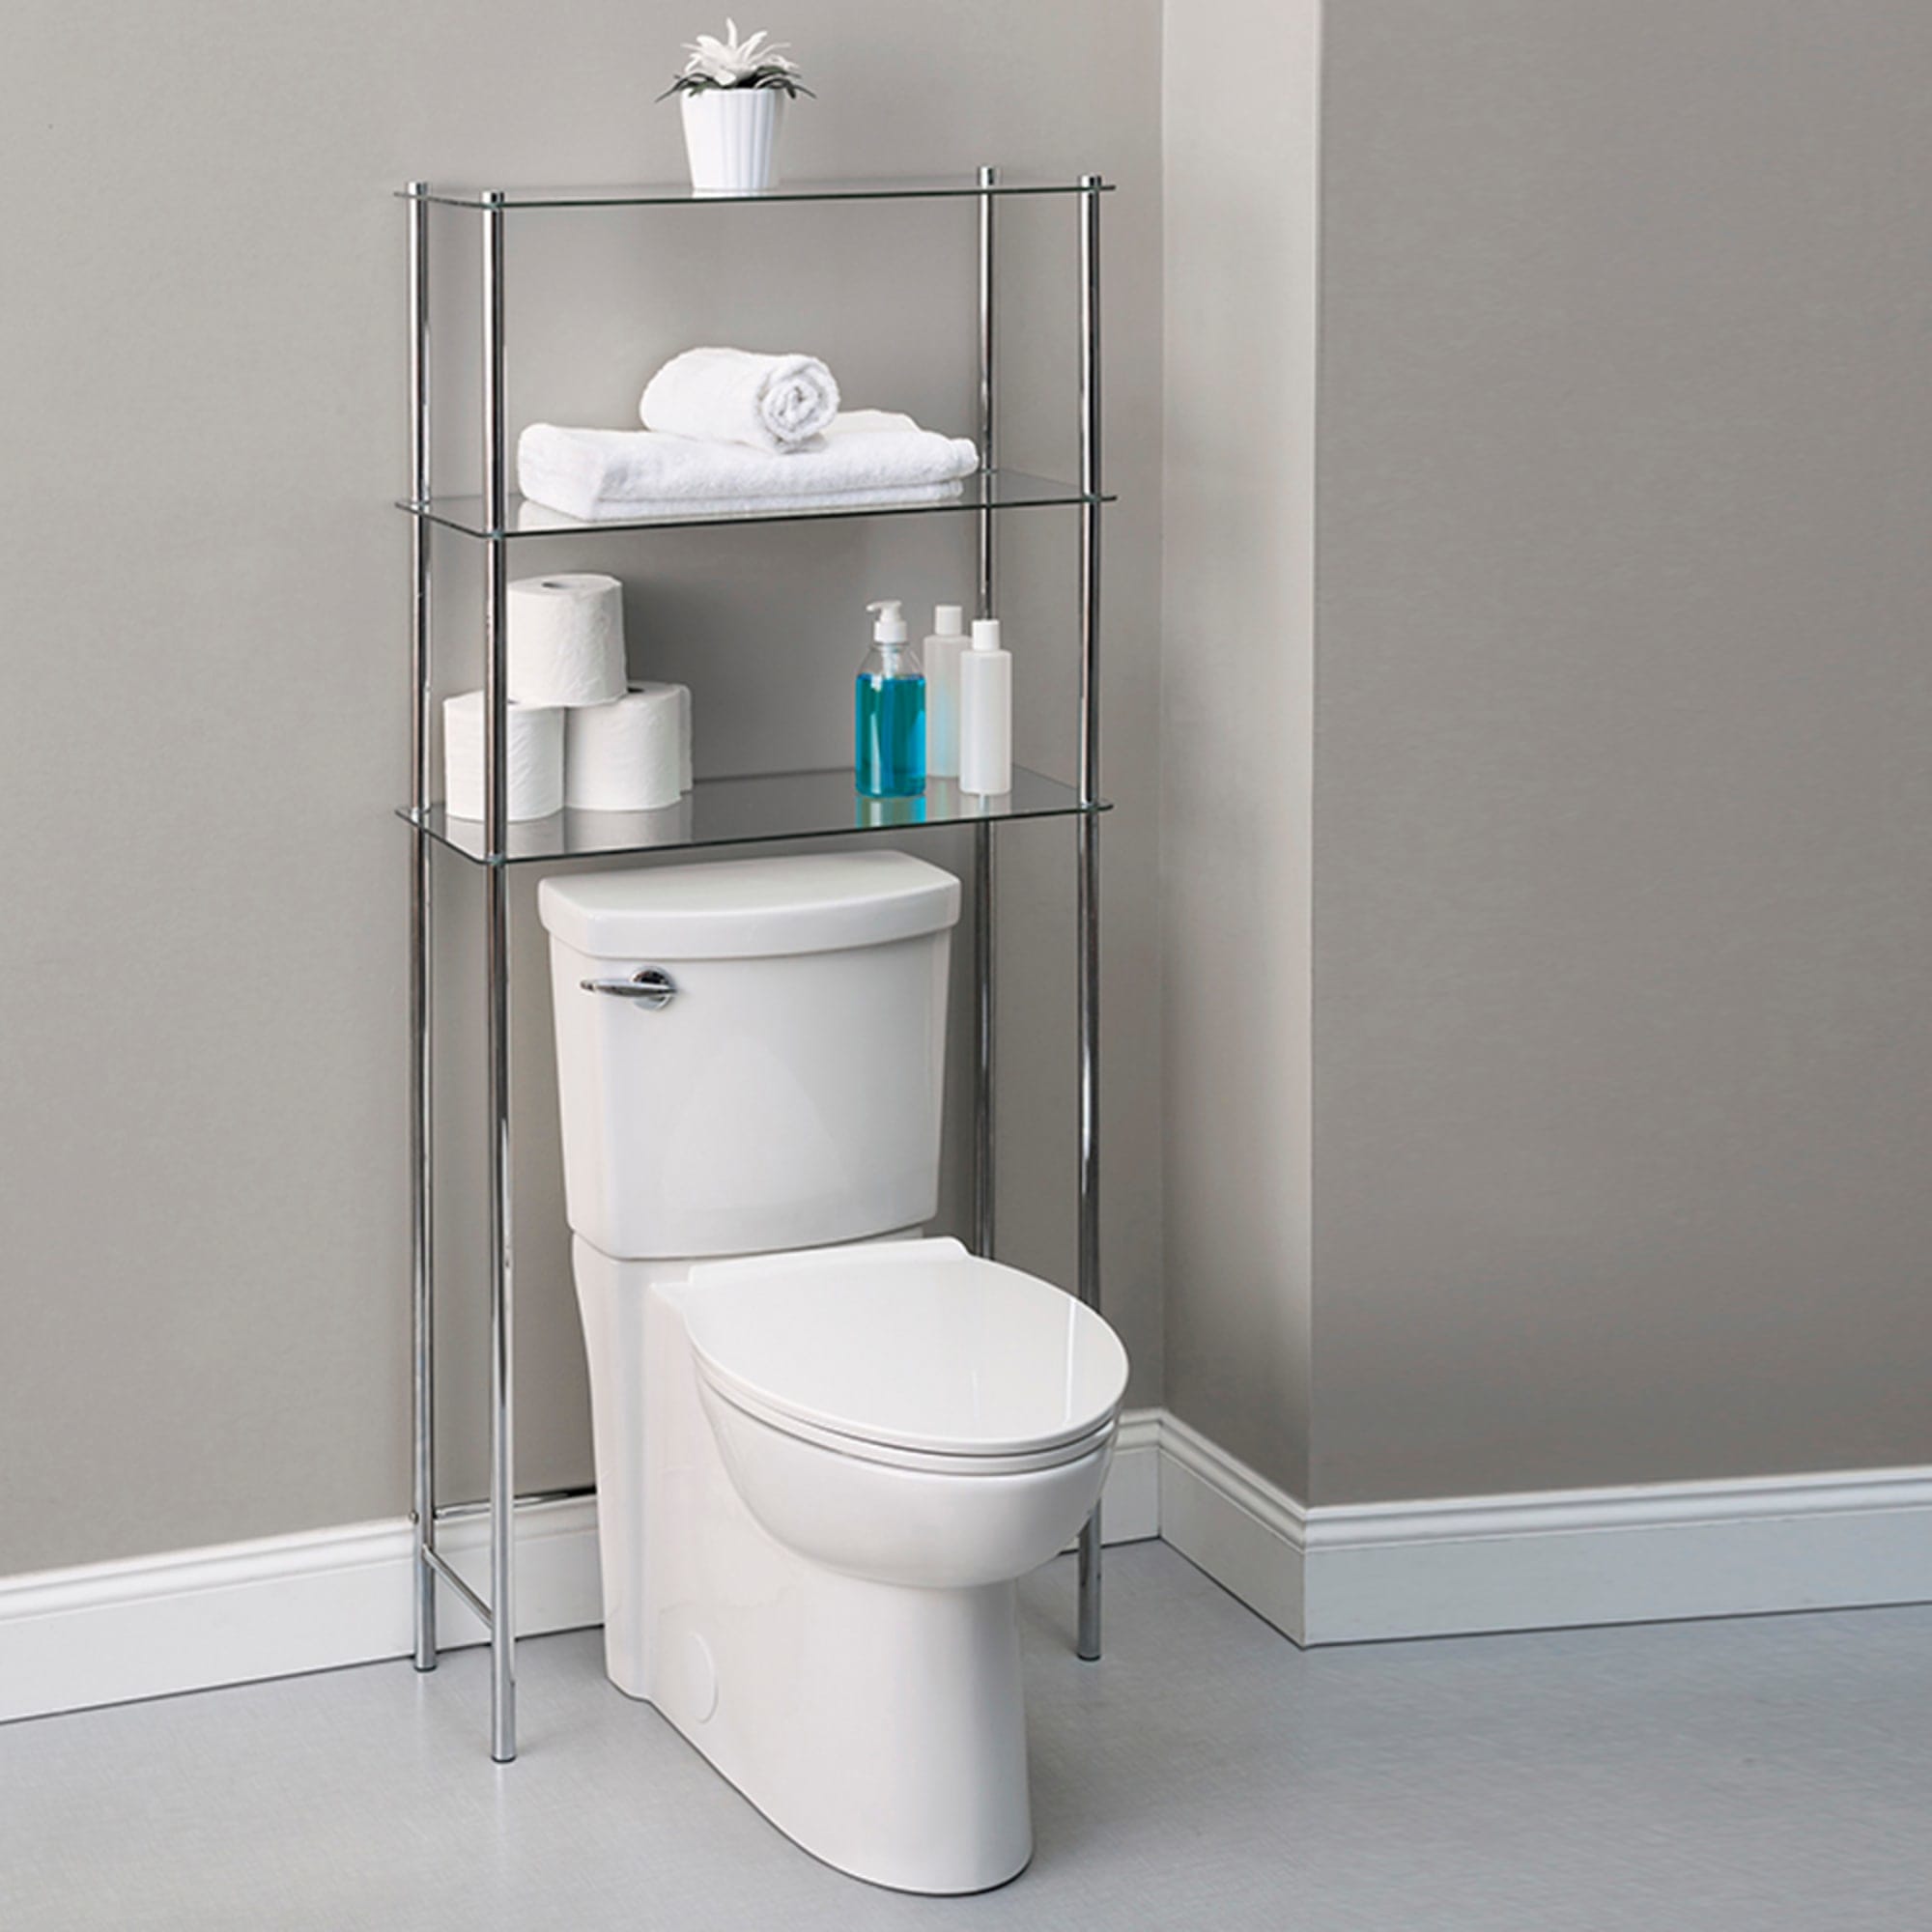 Home Basics 3 Tier  Over the Toilet Space Saver with Tempered Glass Shelves, Chrome $70.00 EACH, CASE PACK OF 4